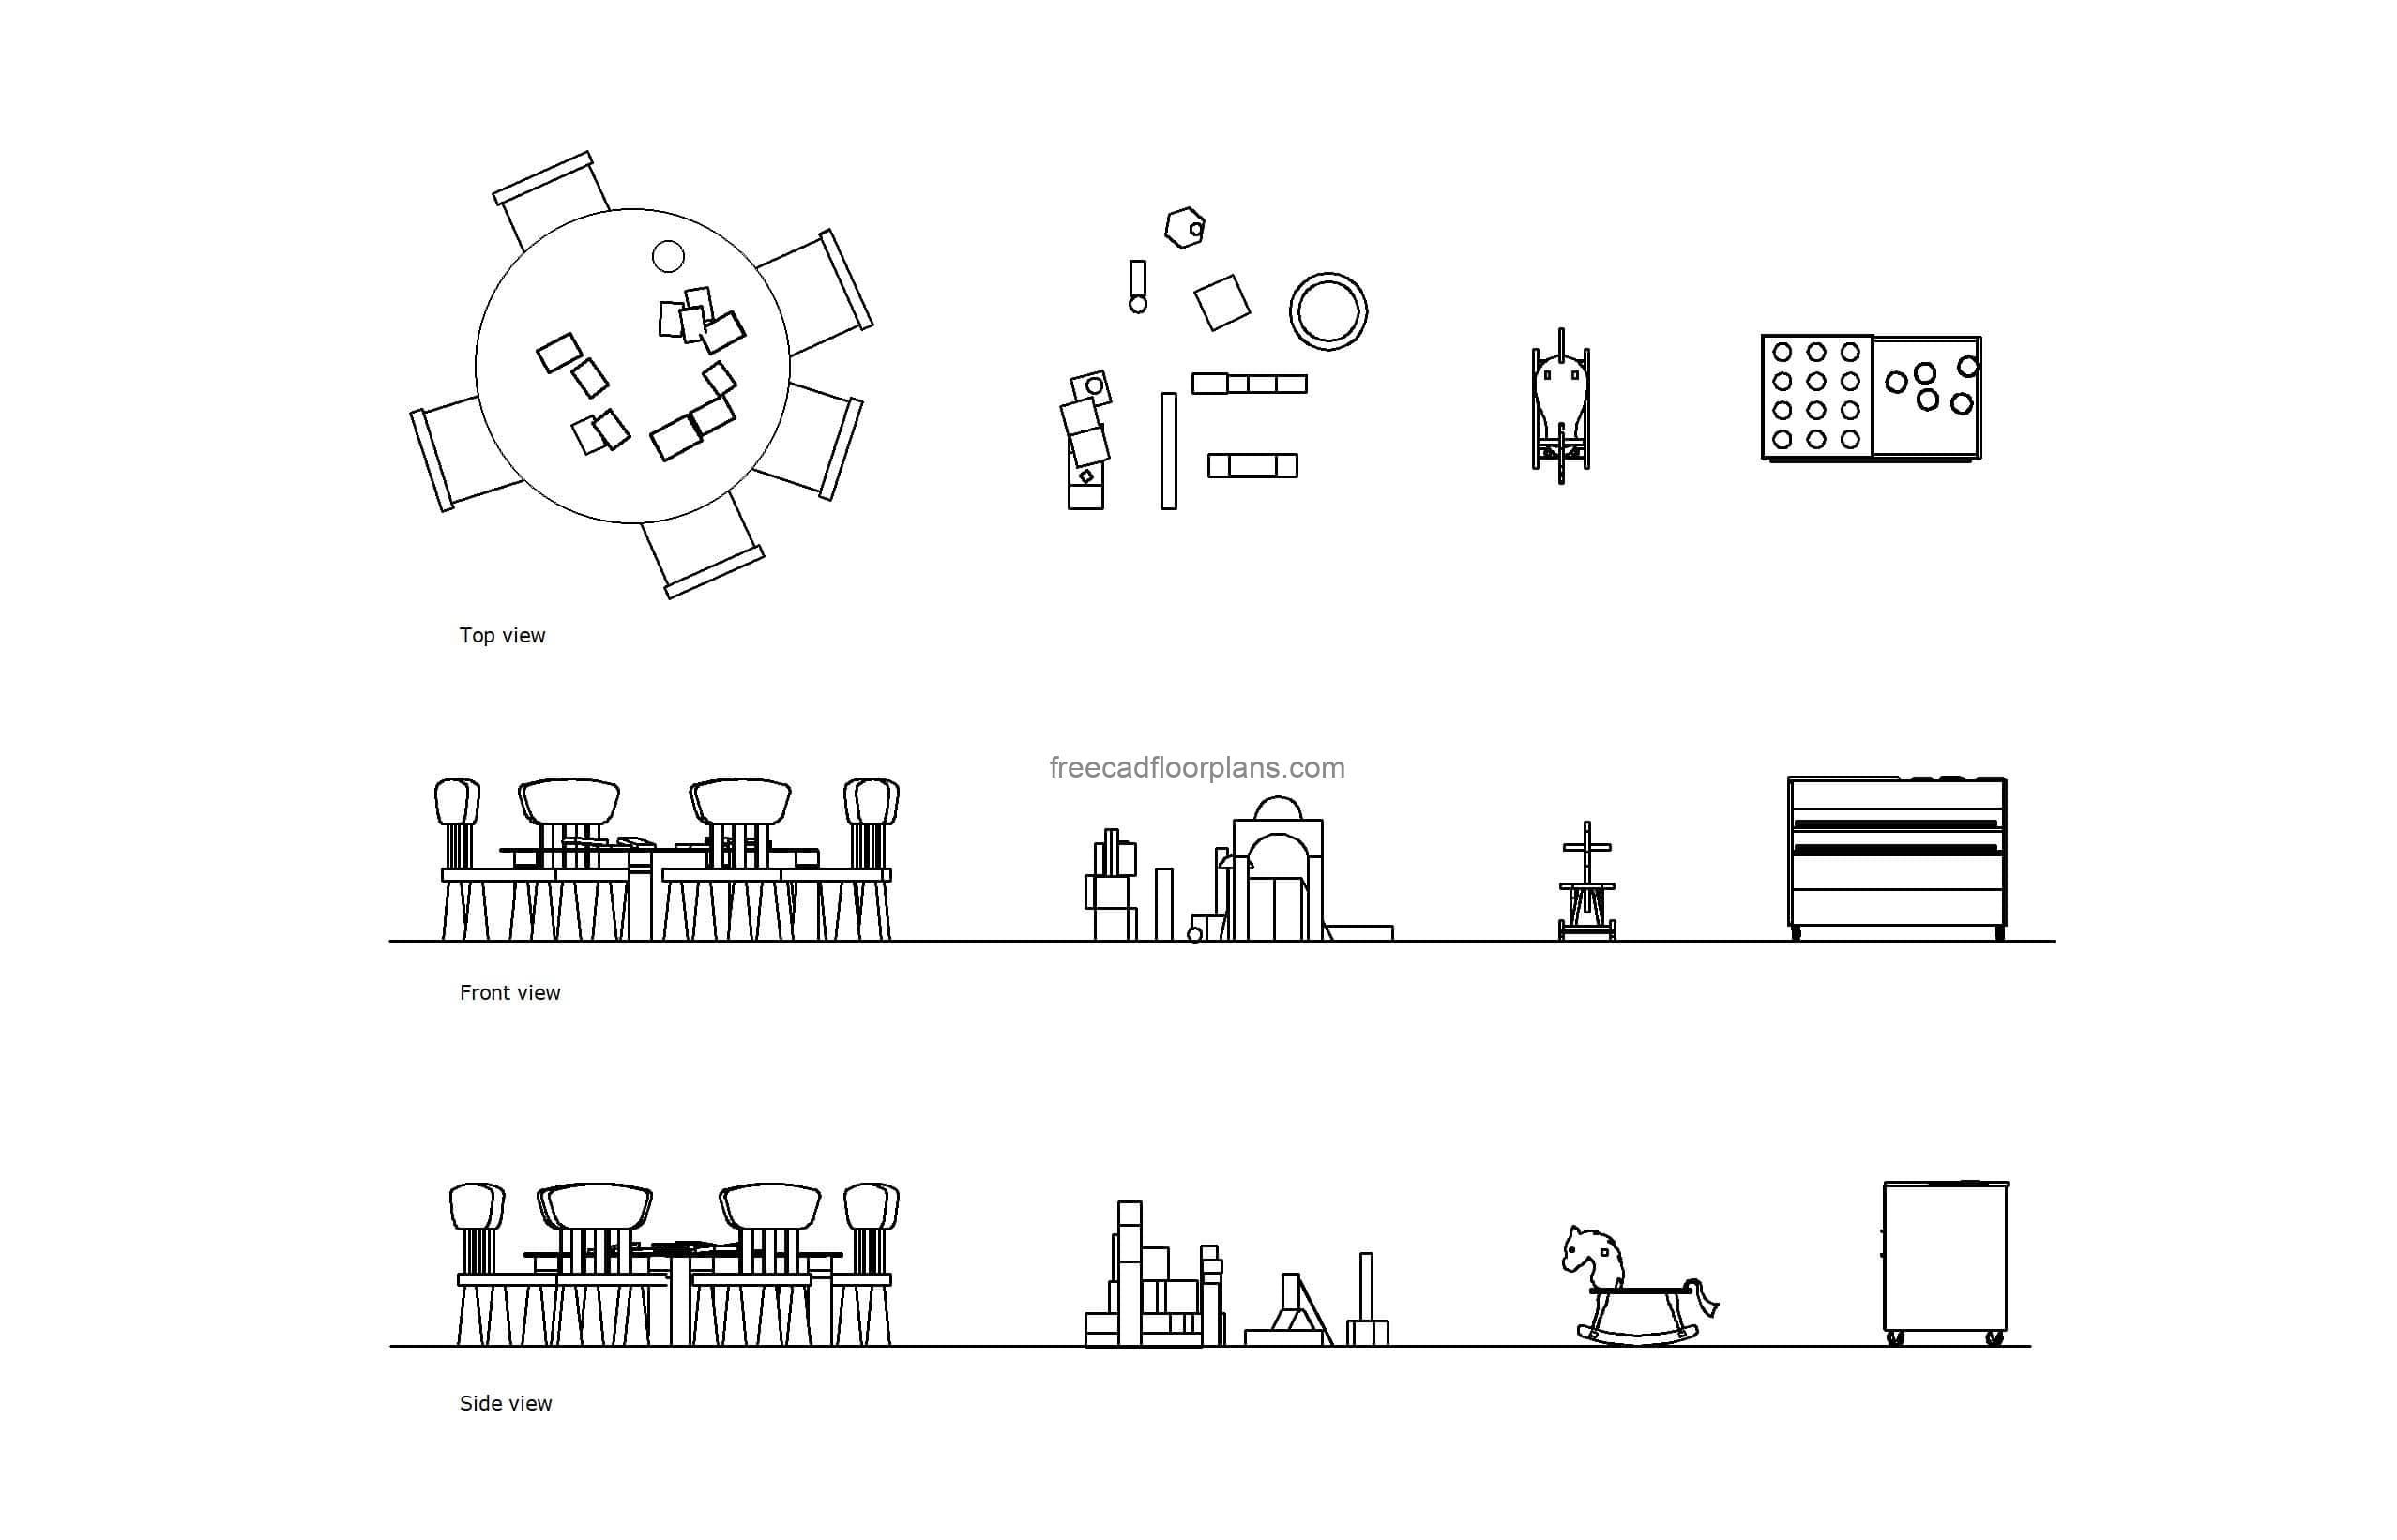 autocad drawing of different preschool furniture, 2d plan and elevation views, dwg file for free download